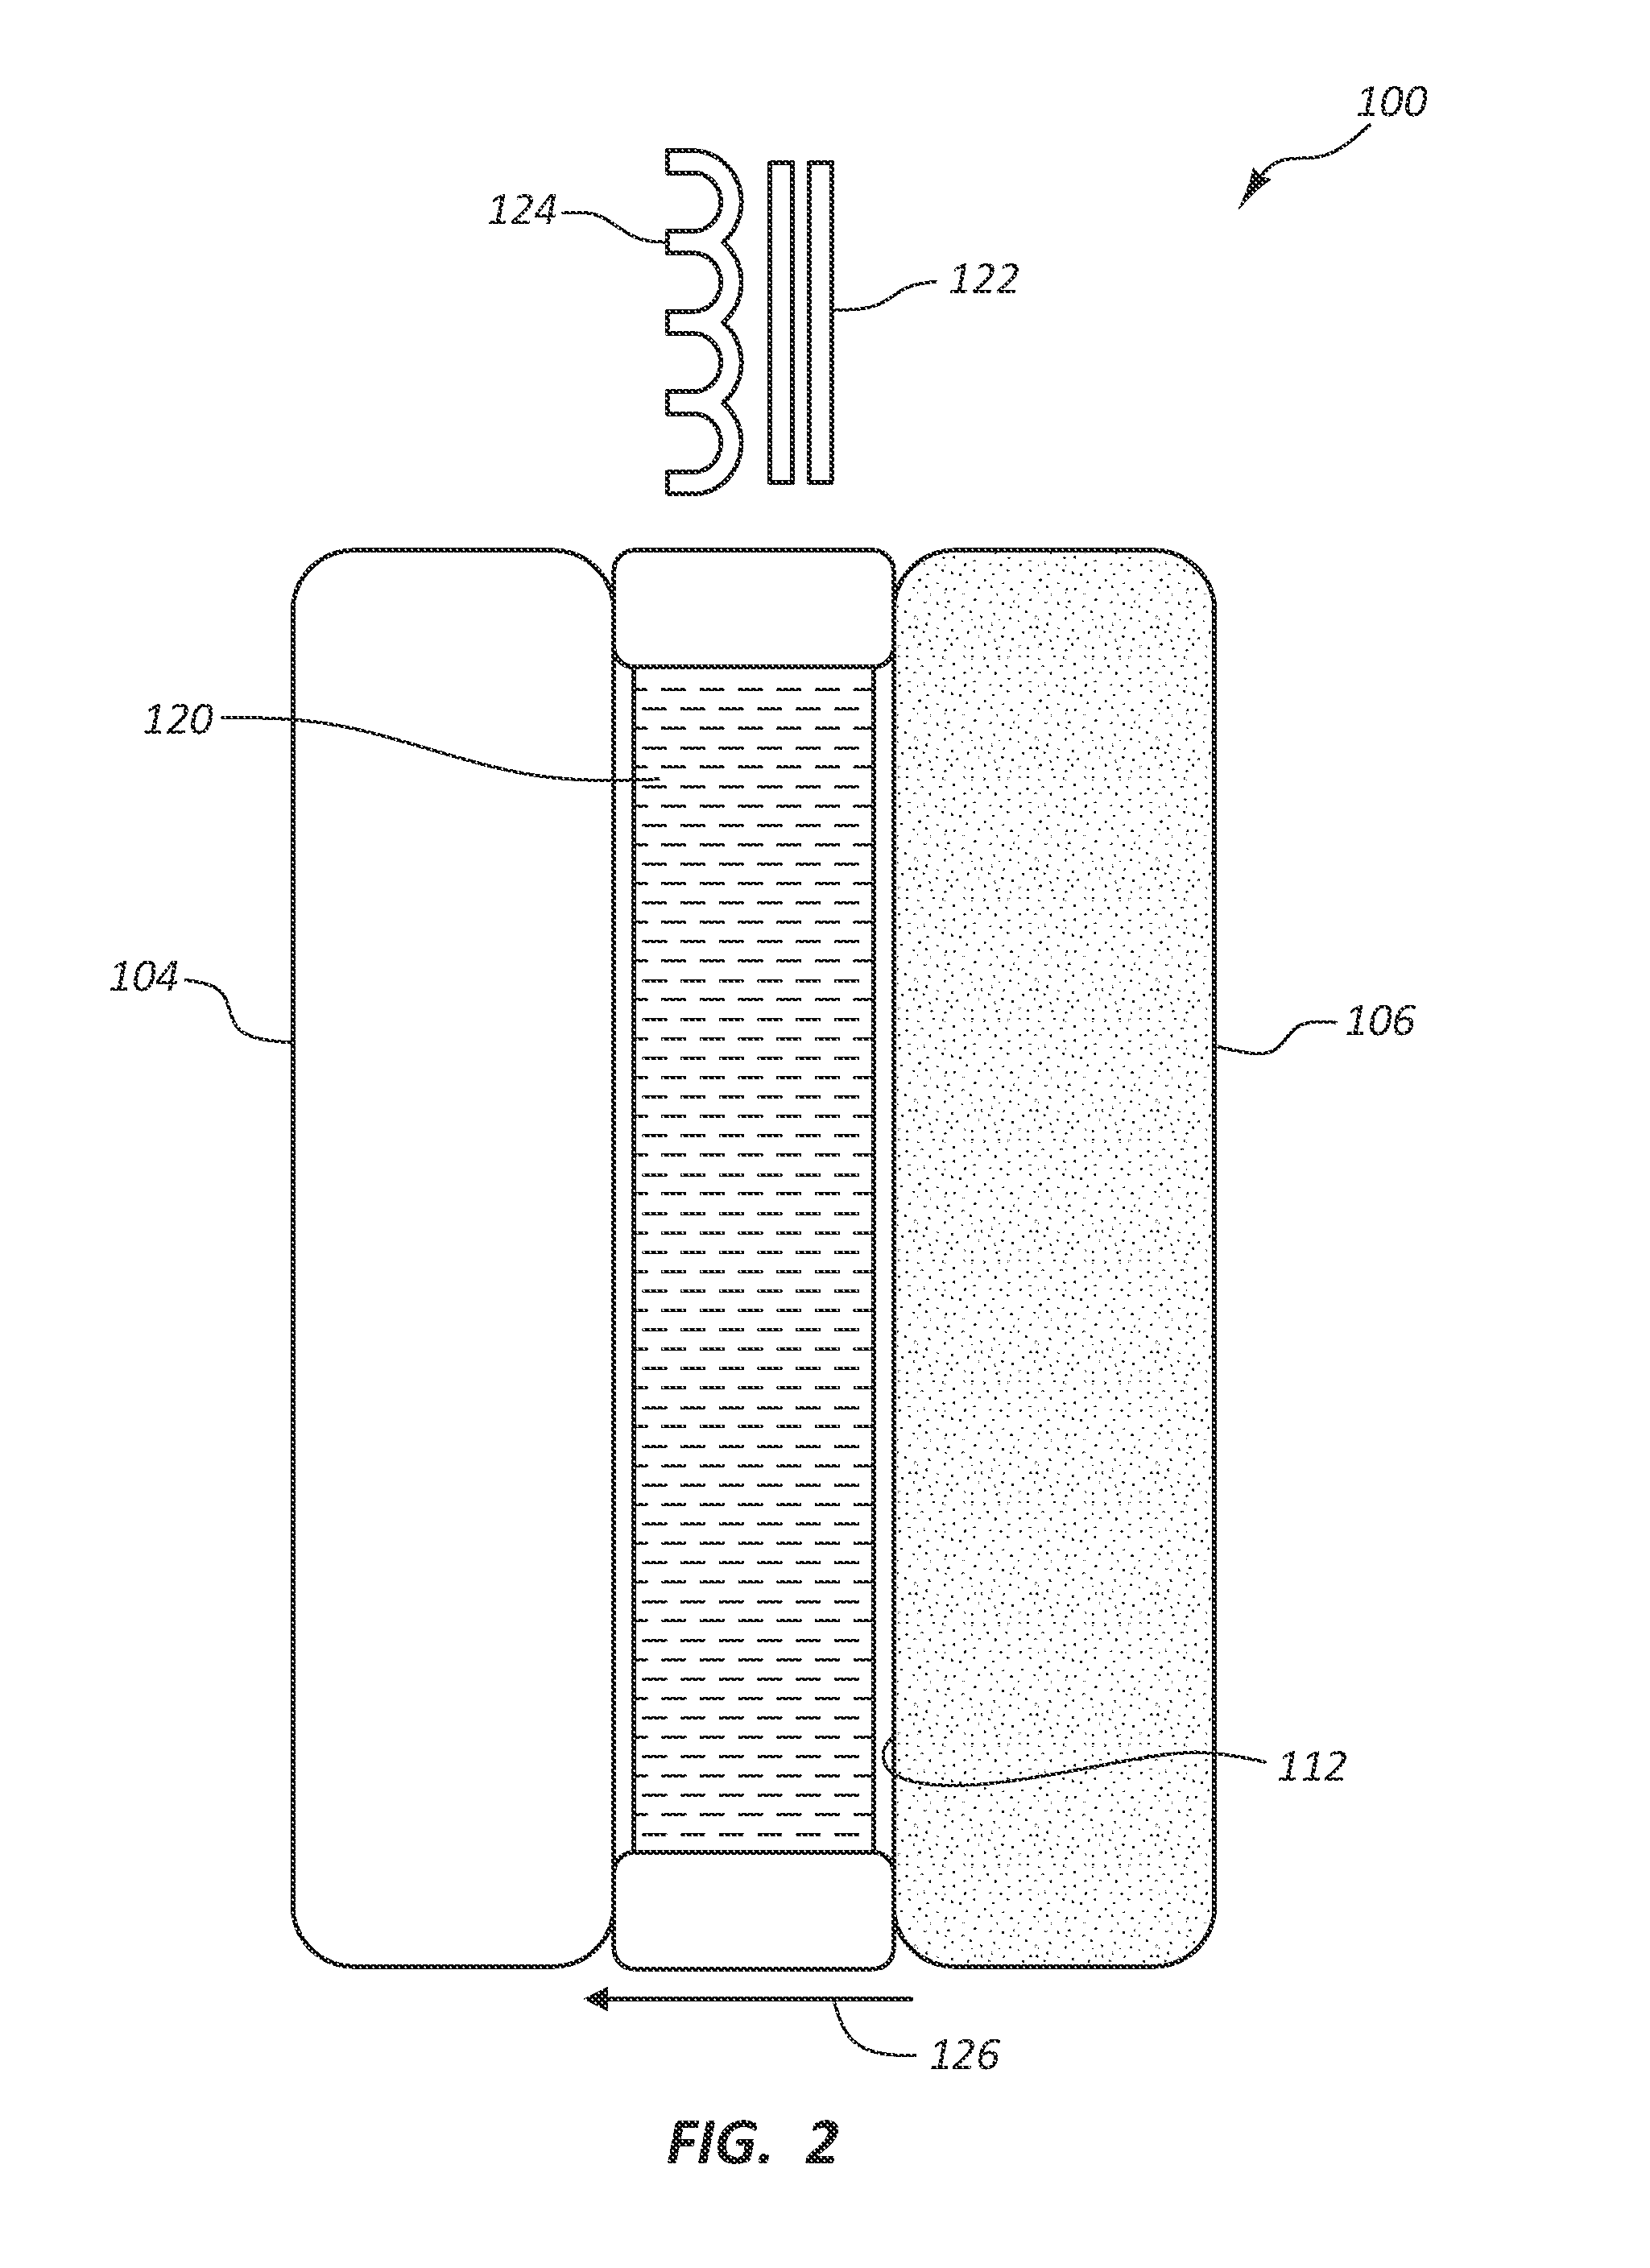 Systems and Methods for Developing Terrestrial and Algal Biomass Feedstocks and Bio-Refining the Same